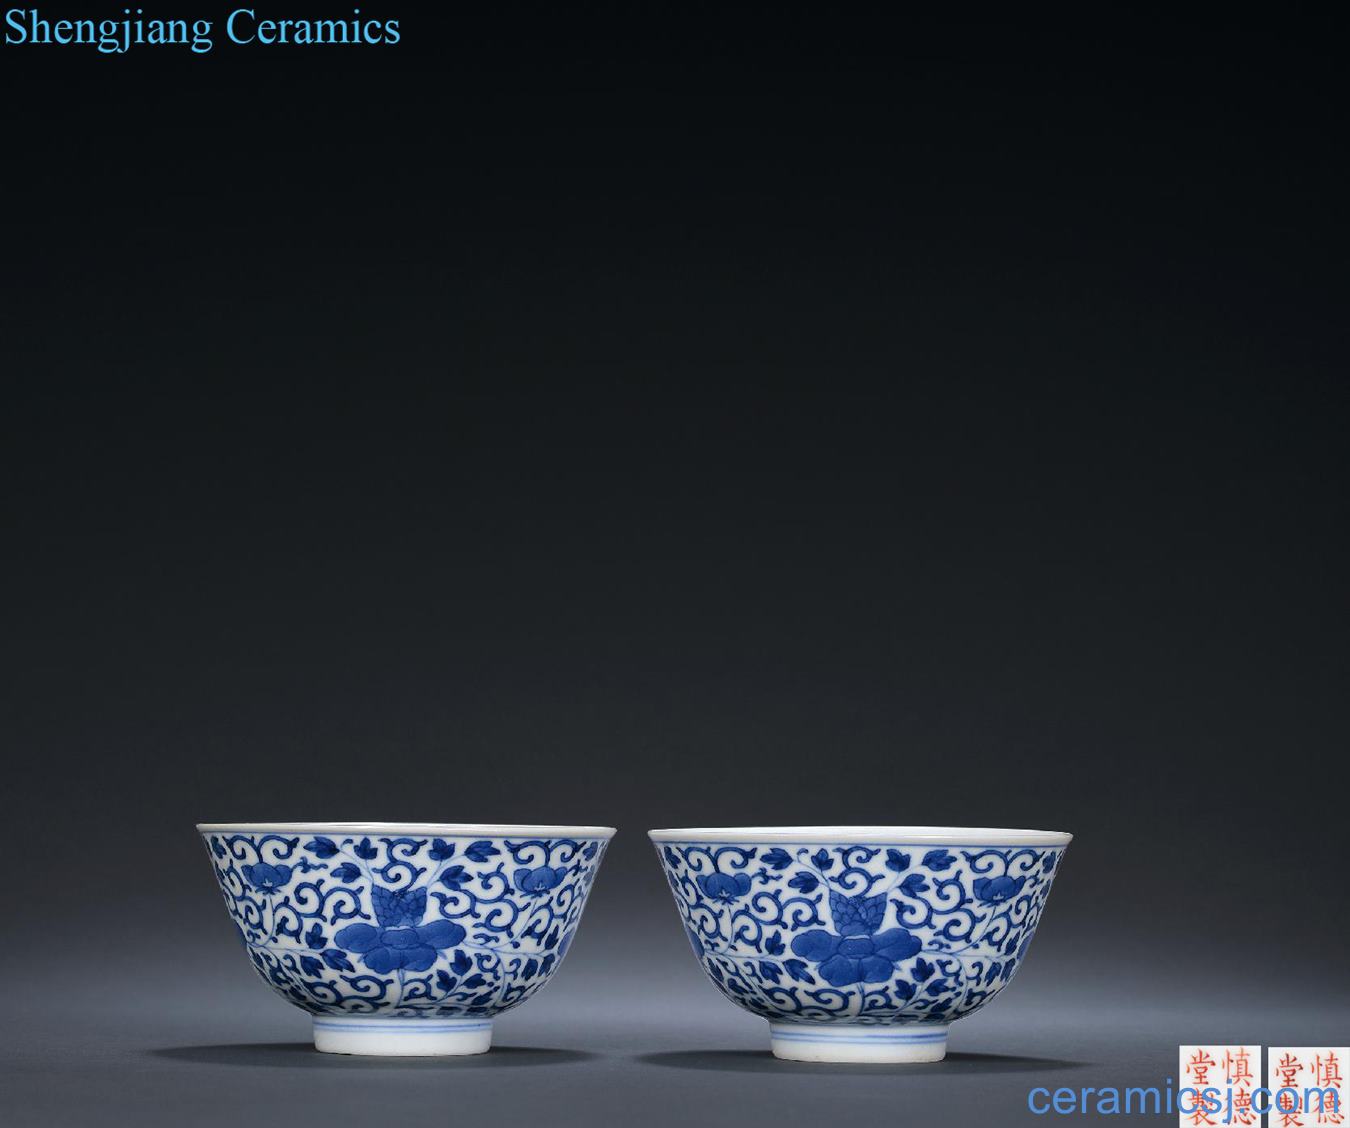 Qing daoguang Blue and white tie peony bowl (a)